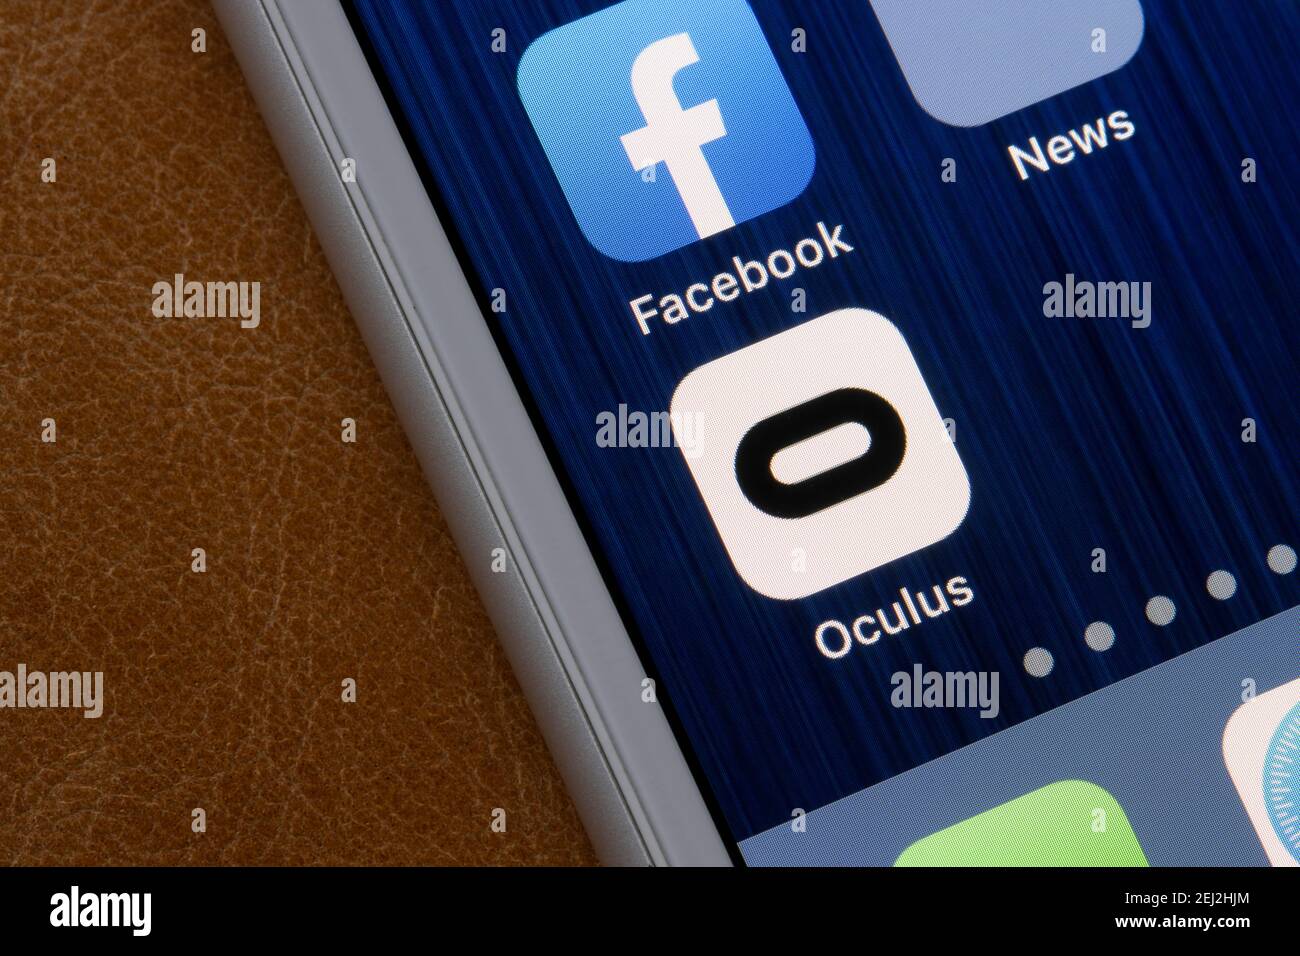 Oculus app icon is seen on an iPhone. Oculus is a brand of Facebook Technologies, LLC, which produces VR headsets, including the Rift and Quest lines. Stock Photo